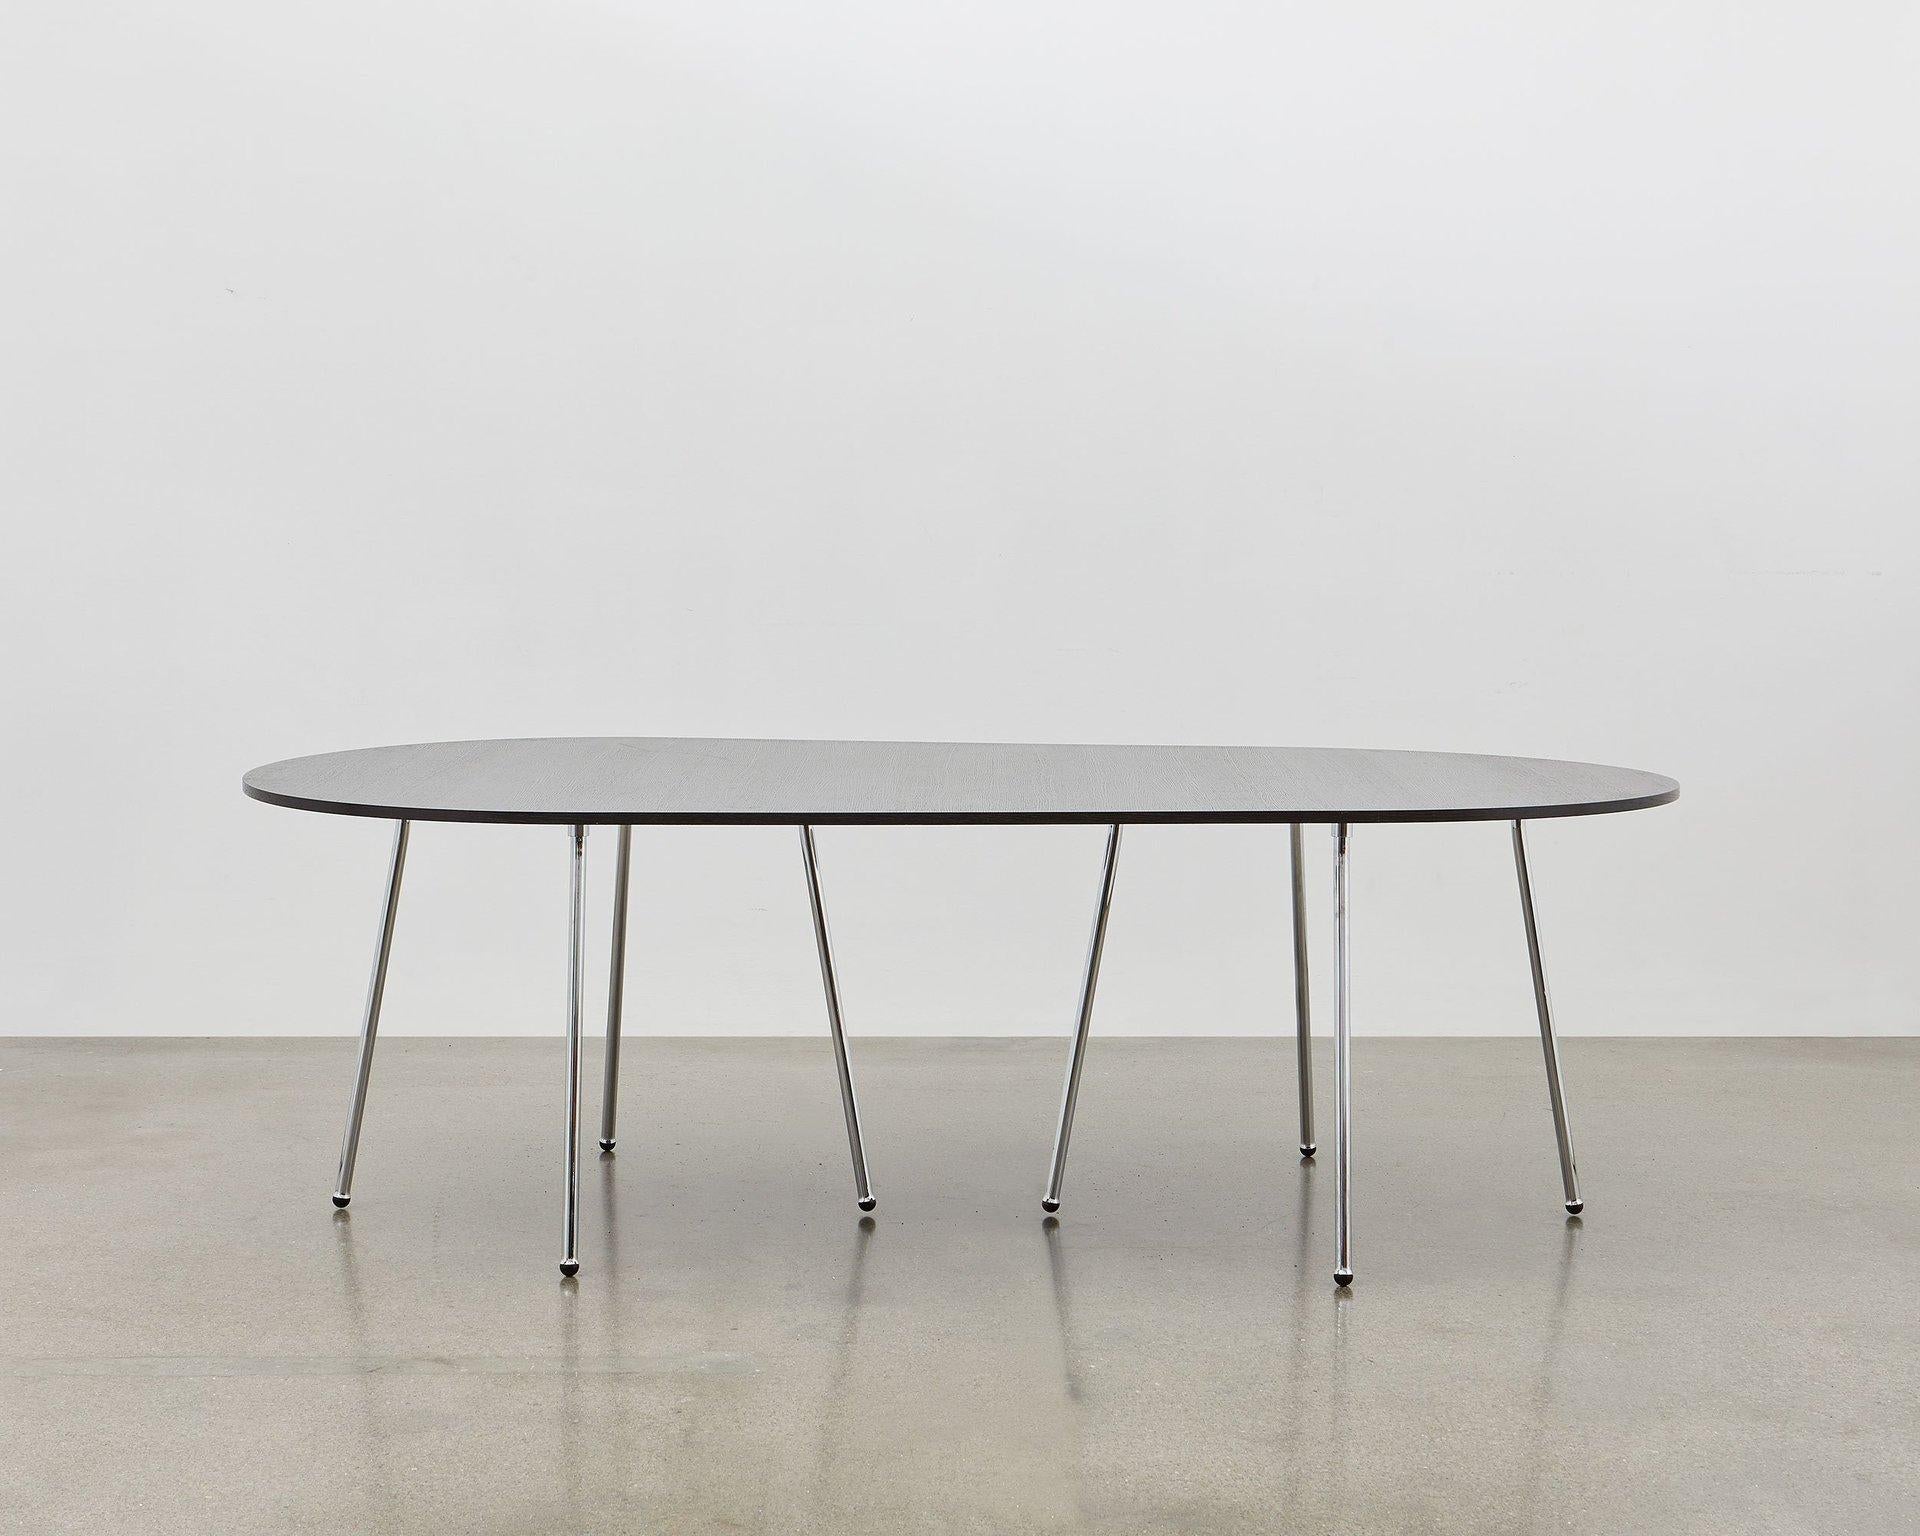 The PH Dining Table was designed in 1937; it is simple and elegant. Function meets form and the distinctive, light look of the PH Dining Table makes it suitable for any purpose at the home, at work or in the meeting room.

The PH Dining Table can